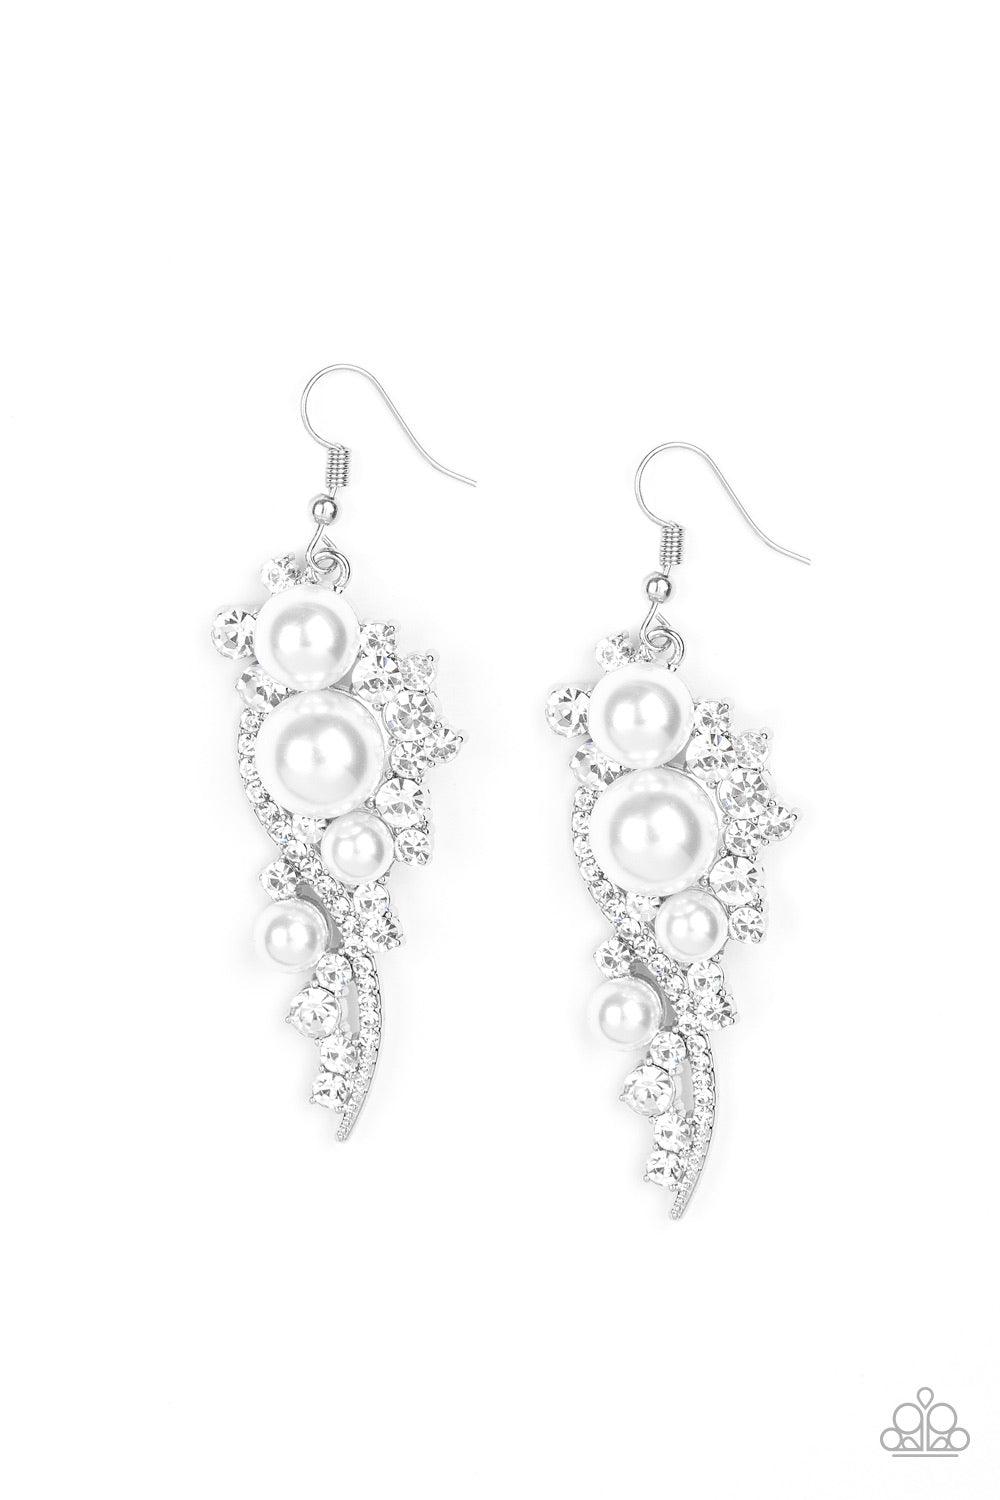 Paparazzi Accessories High-End Elegance - White Bubbly white pearls dot a glistening silver frame interwoven with ribbons of glittery white rhinestones, creating an elegant lure. Earring attaches to a standard fishhook fitting. Jewelry